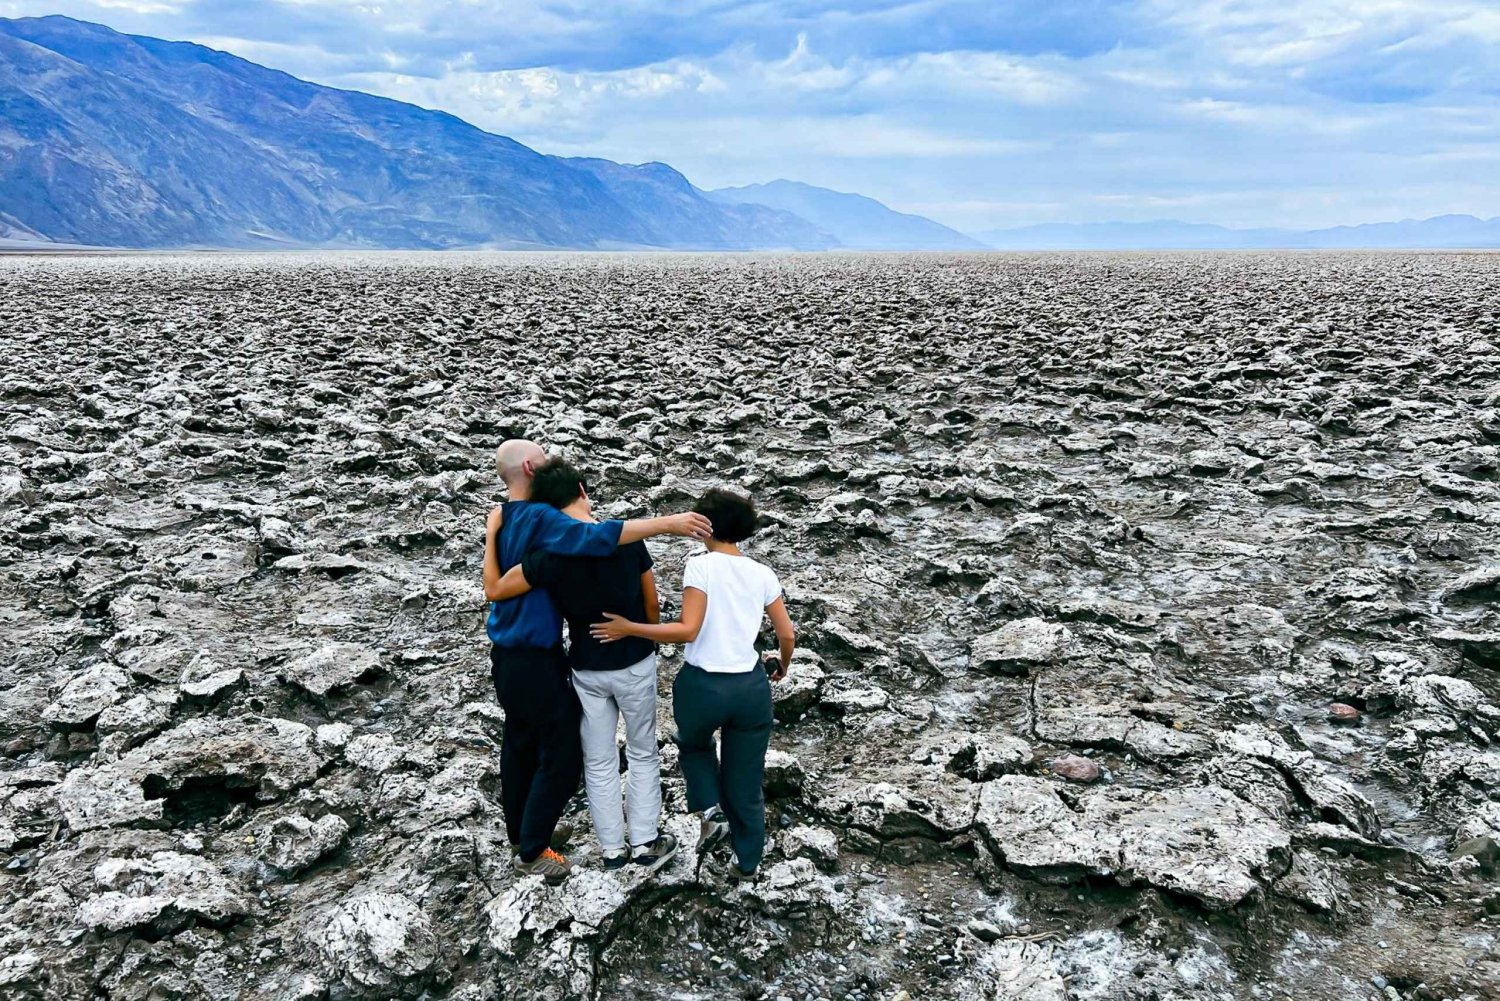 From Las Vegas: Small Group 10 Hour Tour at the Death Valley